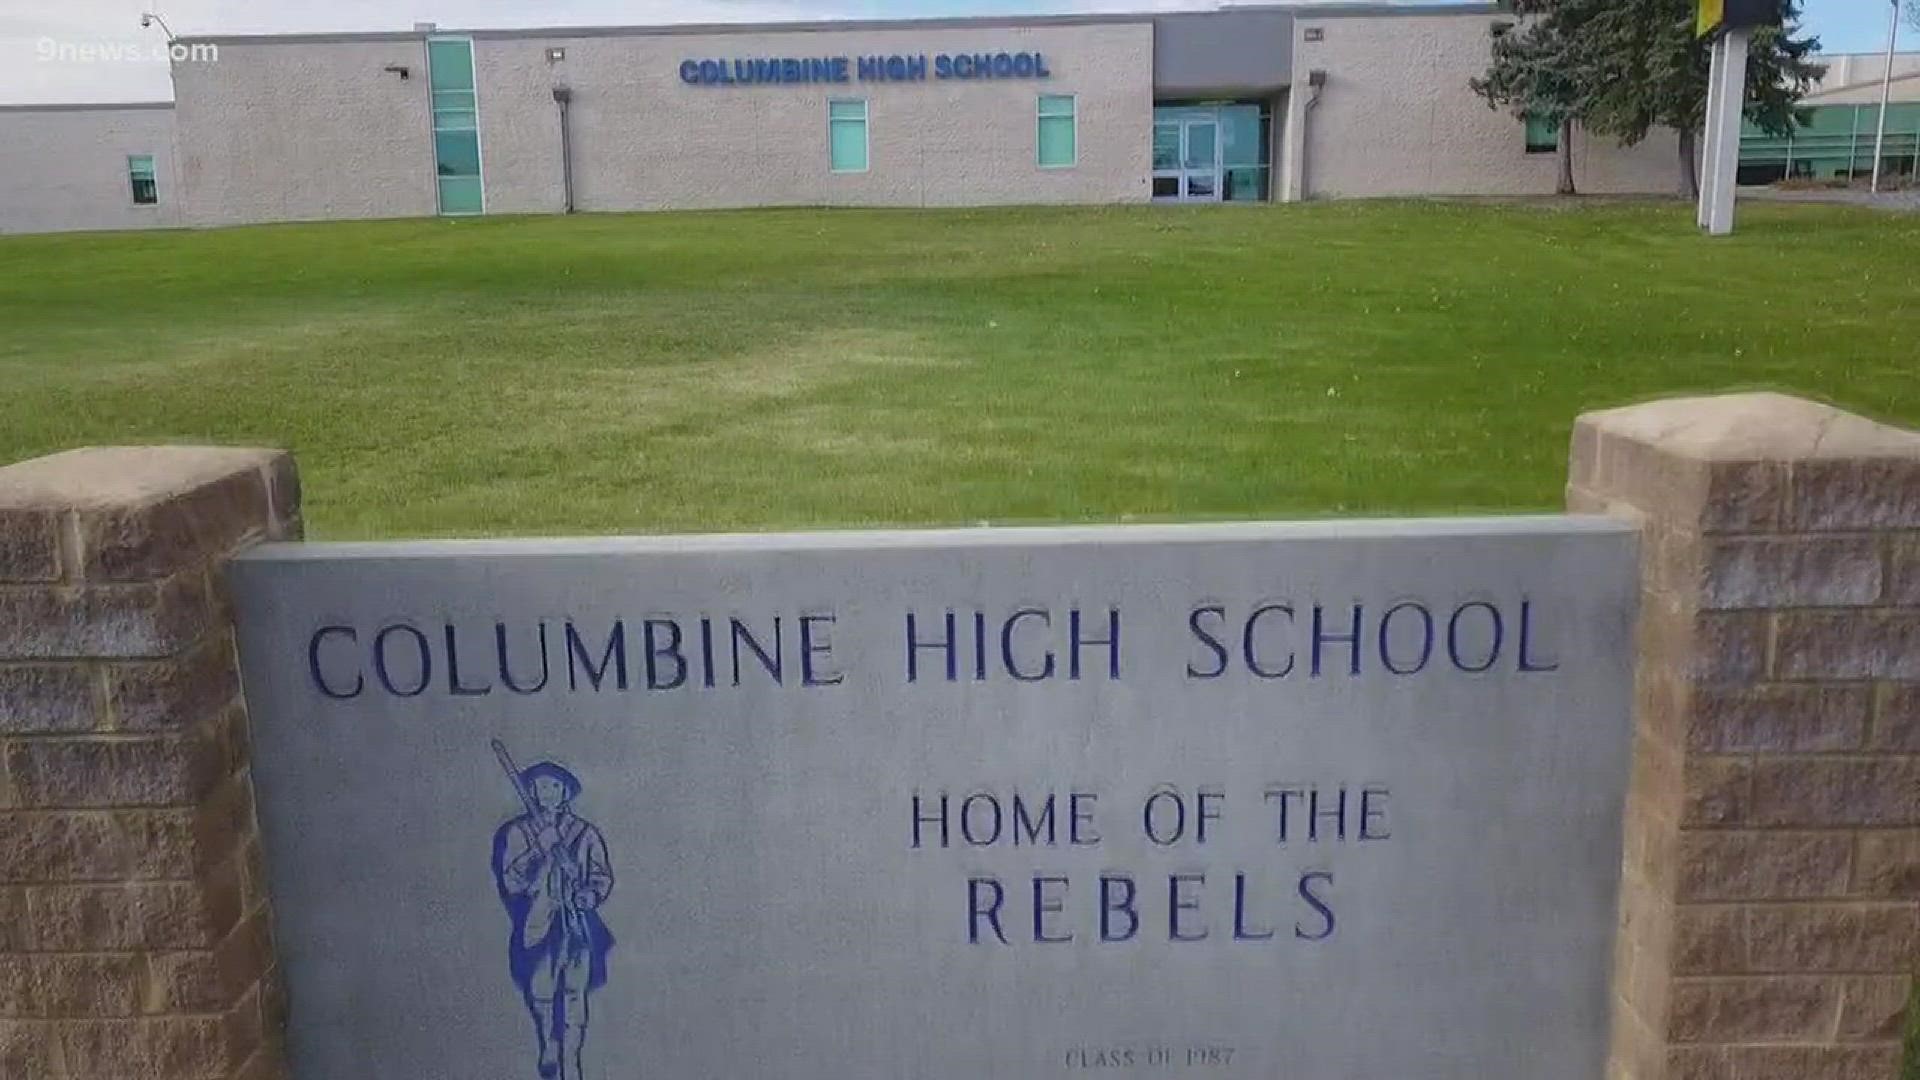 Four staff members who were students at Columbine High School in 1999 when the shooting happened discuss why they returned to the school.